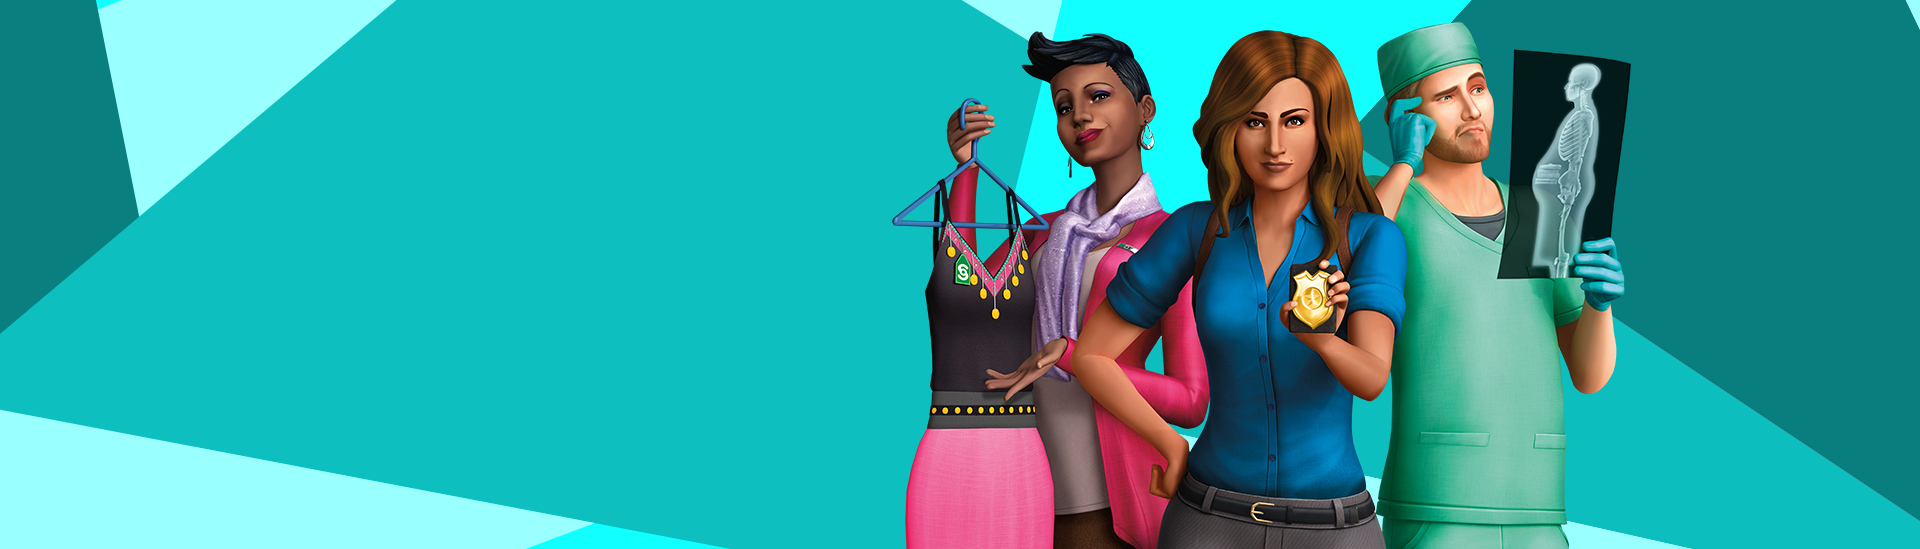 the sims 4 get to work expansion pack features